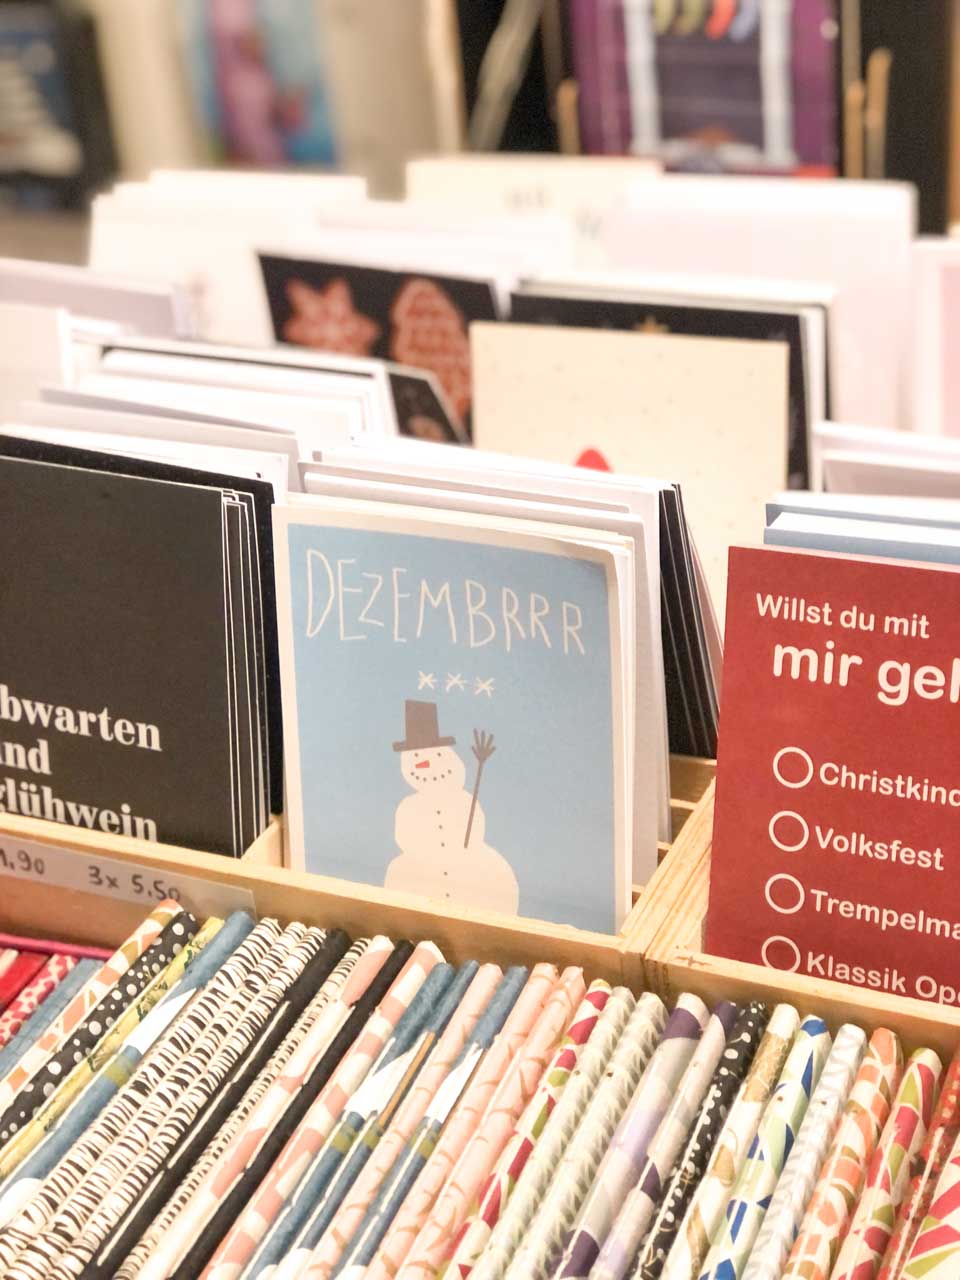 A display of greeting cards at the Christkindlesmarkt in Nuremberg, with one card featuring the word 'DEZEMBRRR' above a whimsical snowman illustration